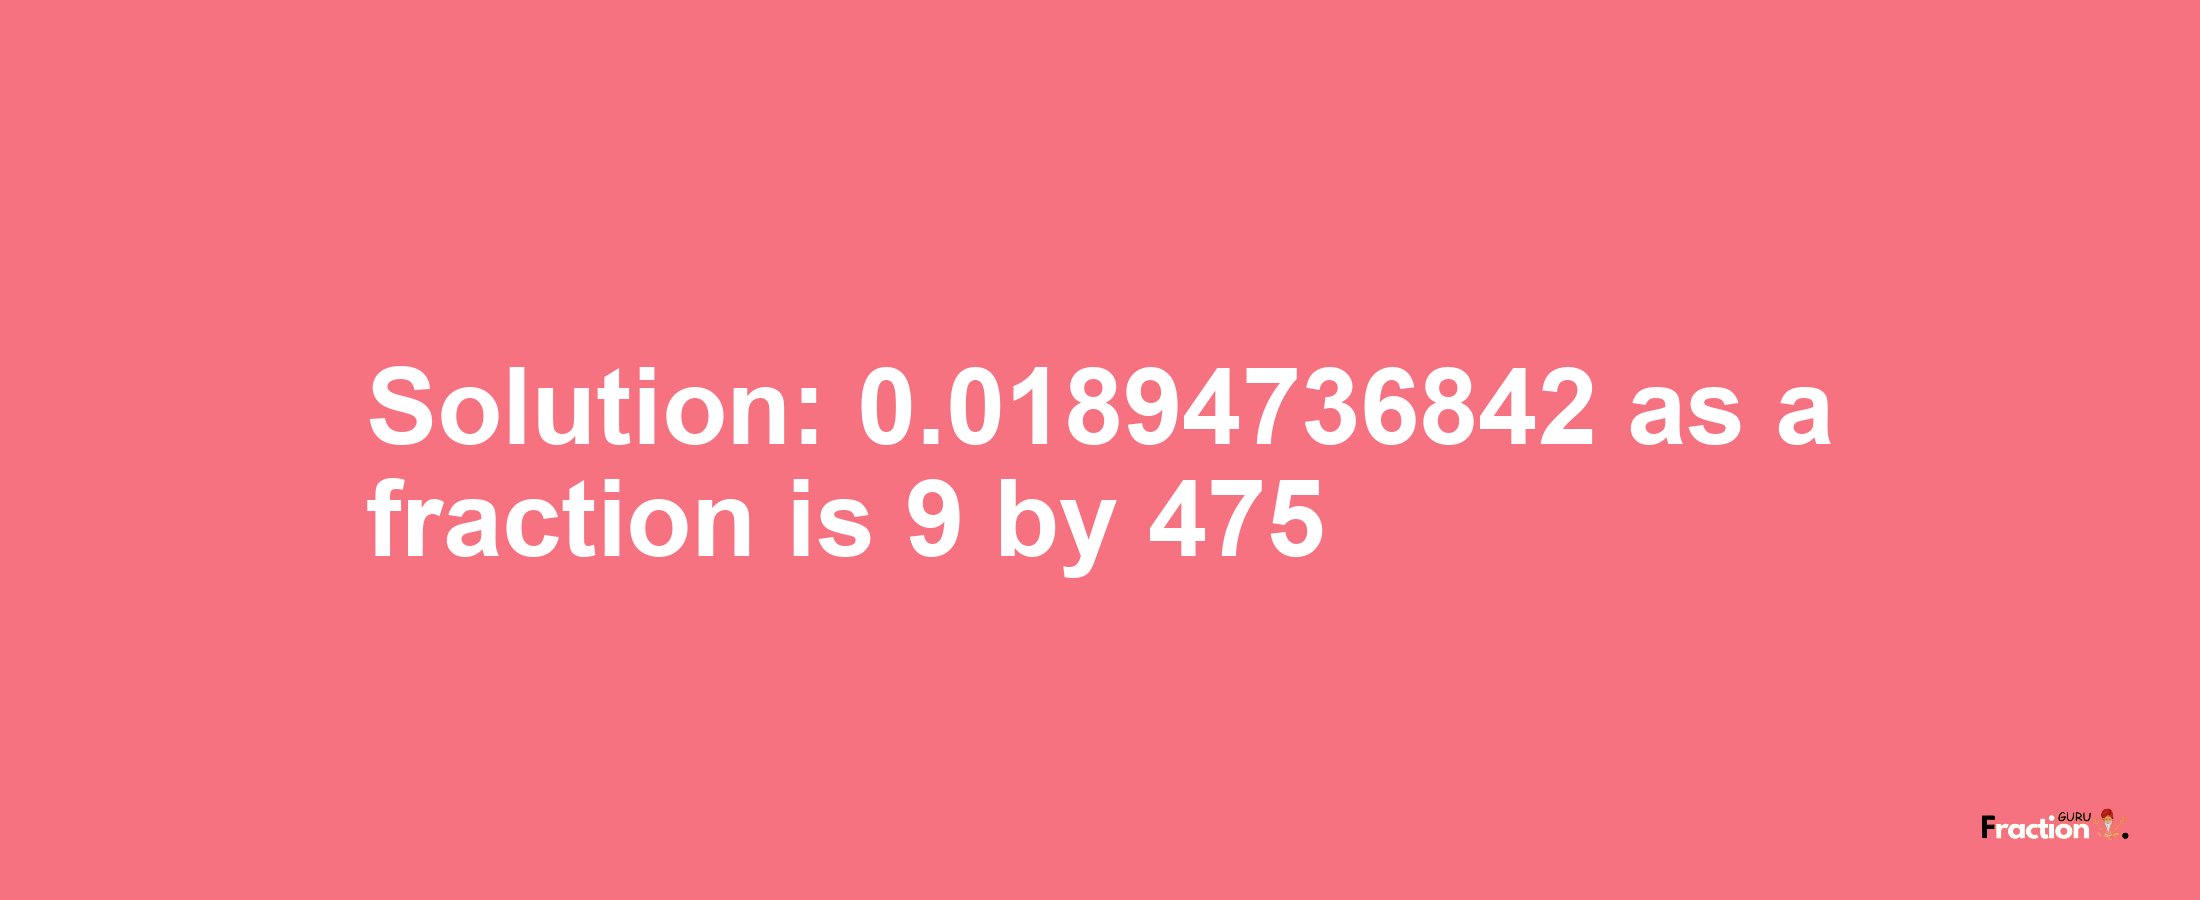 Solution:0.01894736842 as a fraction is 9/475